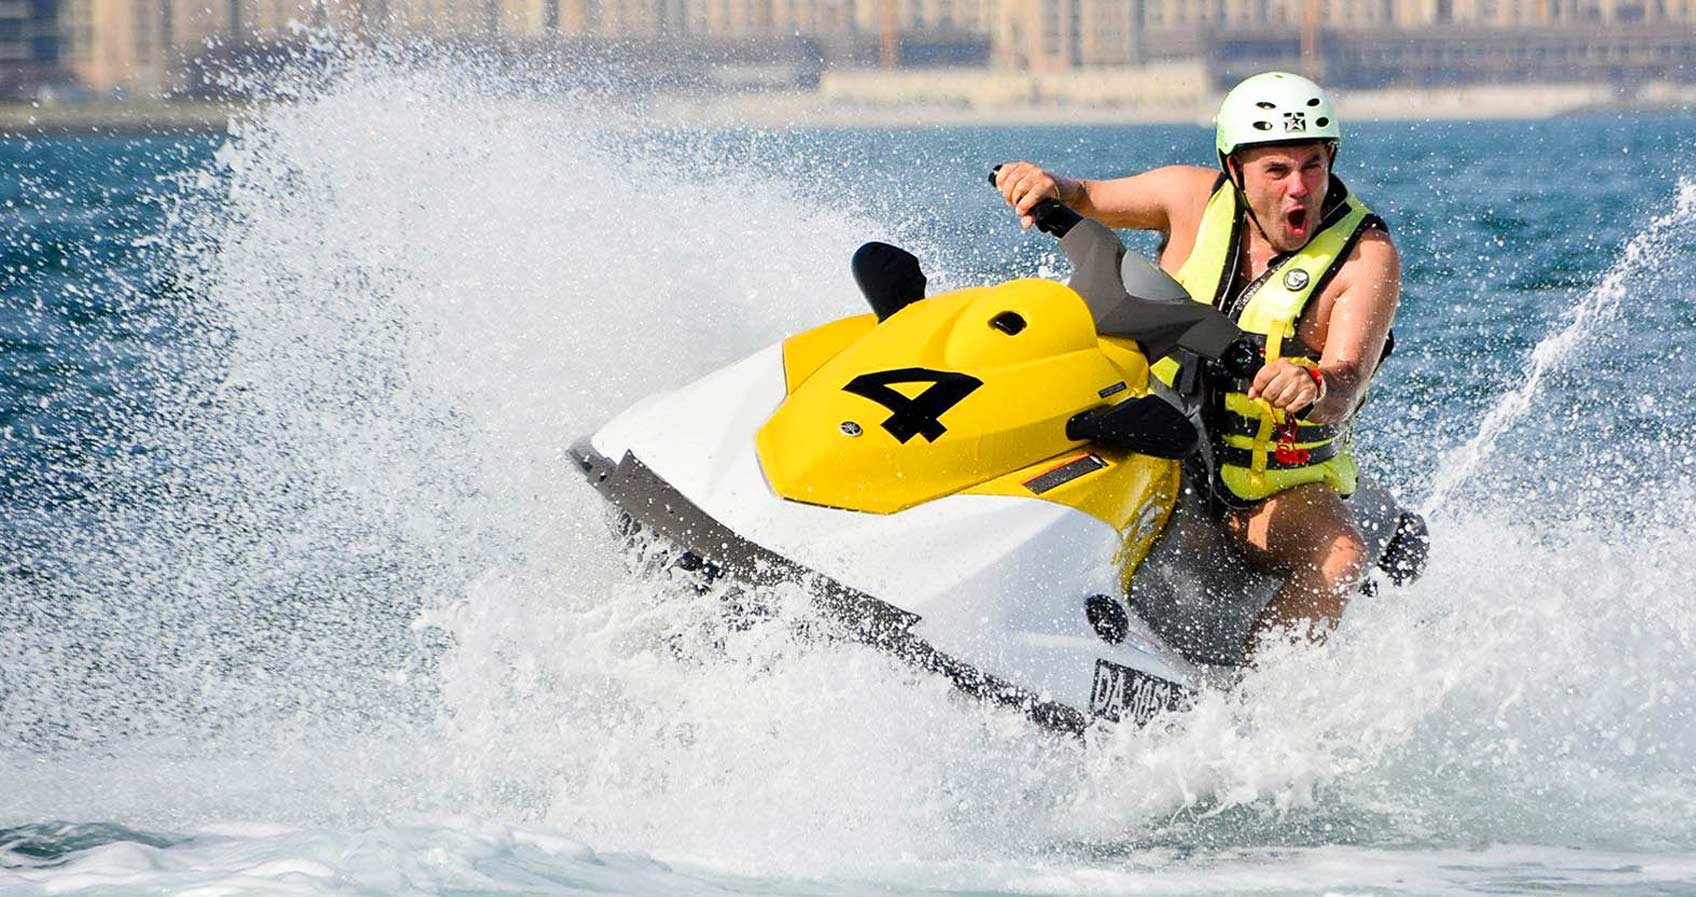 Water Sports Package at Calangute in Goa | Water Activities in Goa